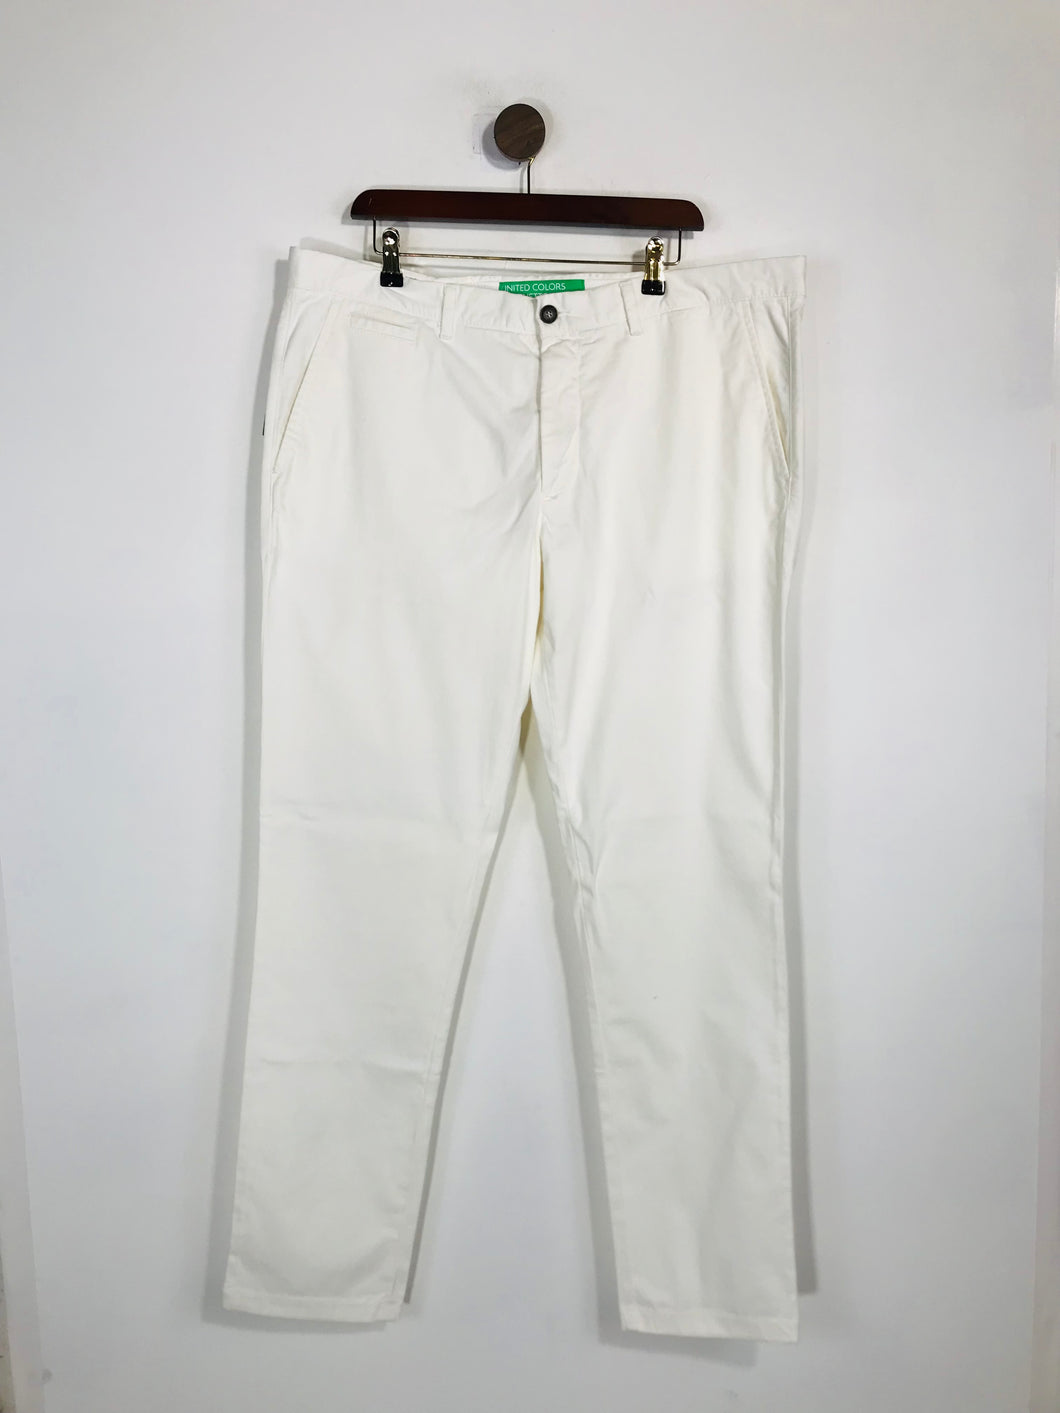 United Colors of Benetton Men's Chinos Trousers NWT | 56 | White